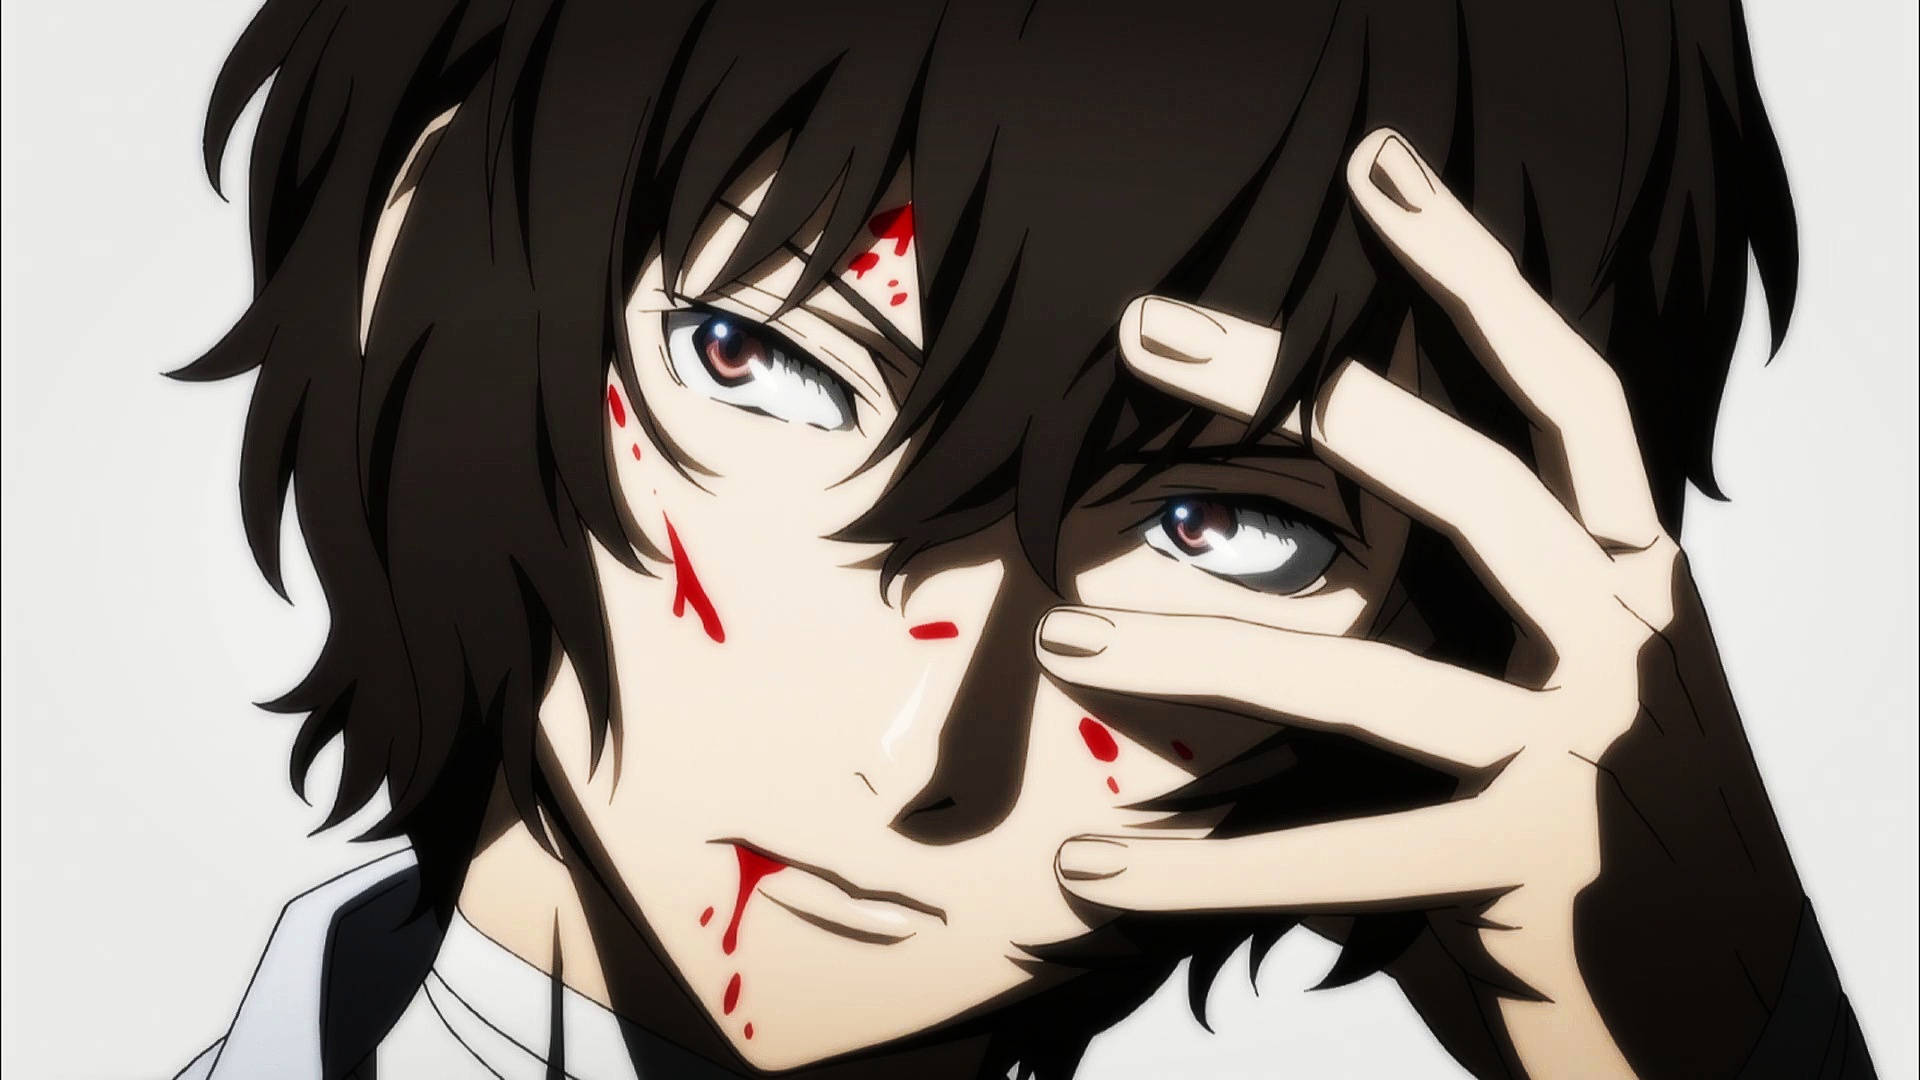 A Gripping Image Of Dazai In Action